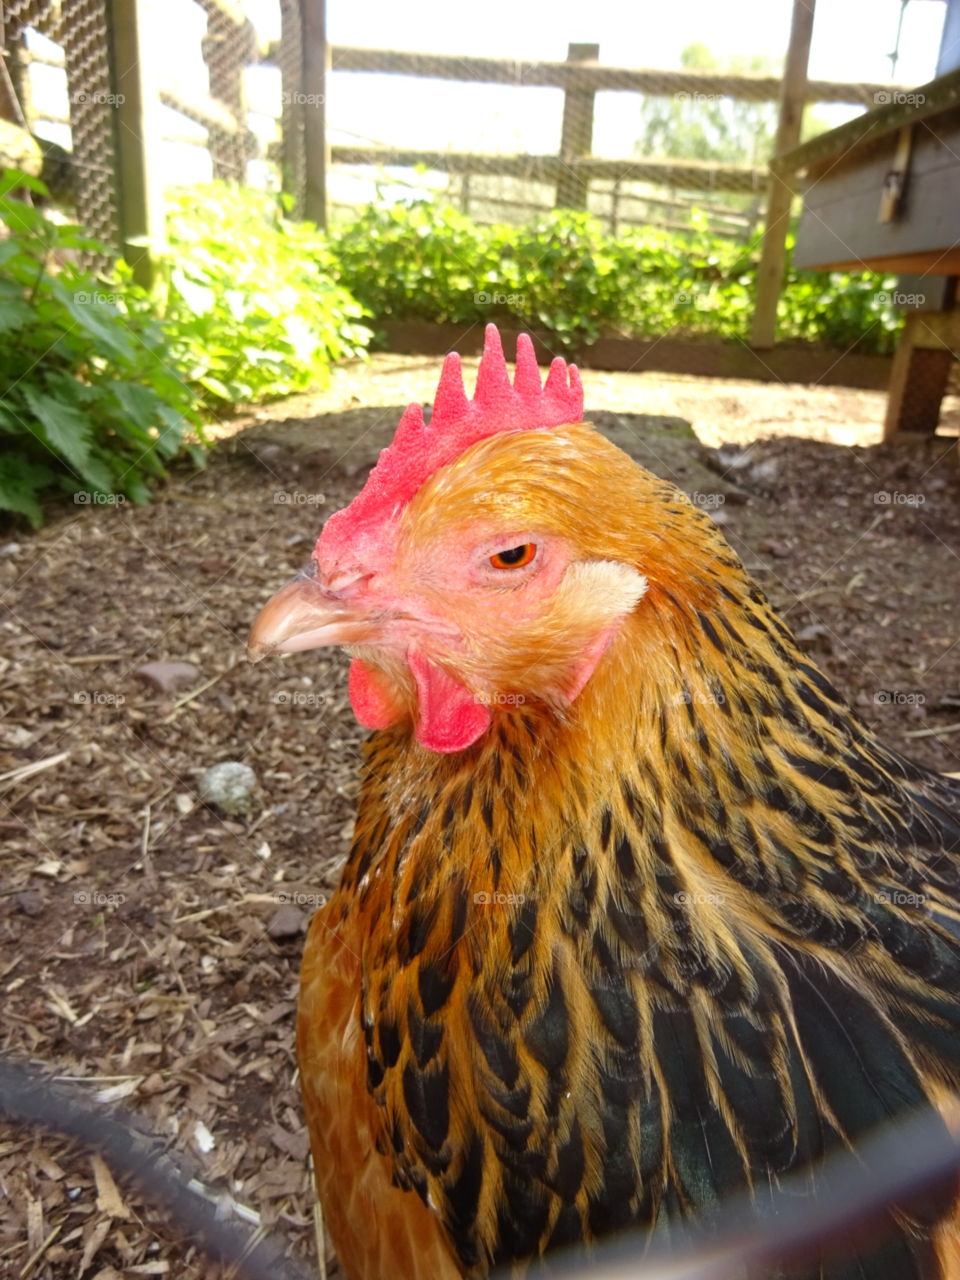 A Chicken posing for a photo